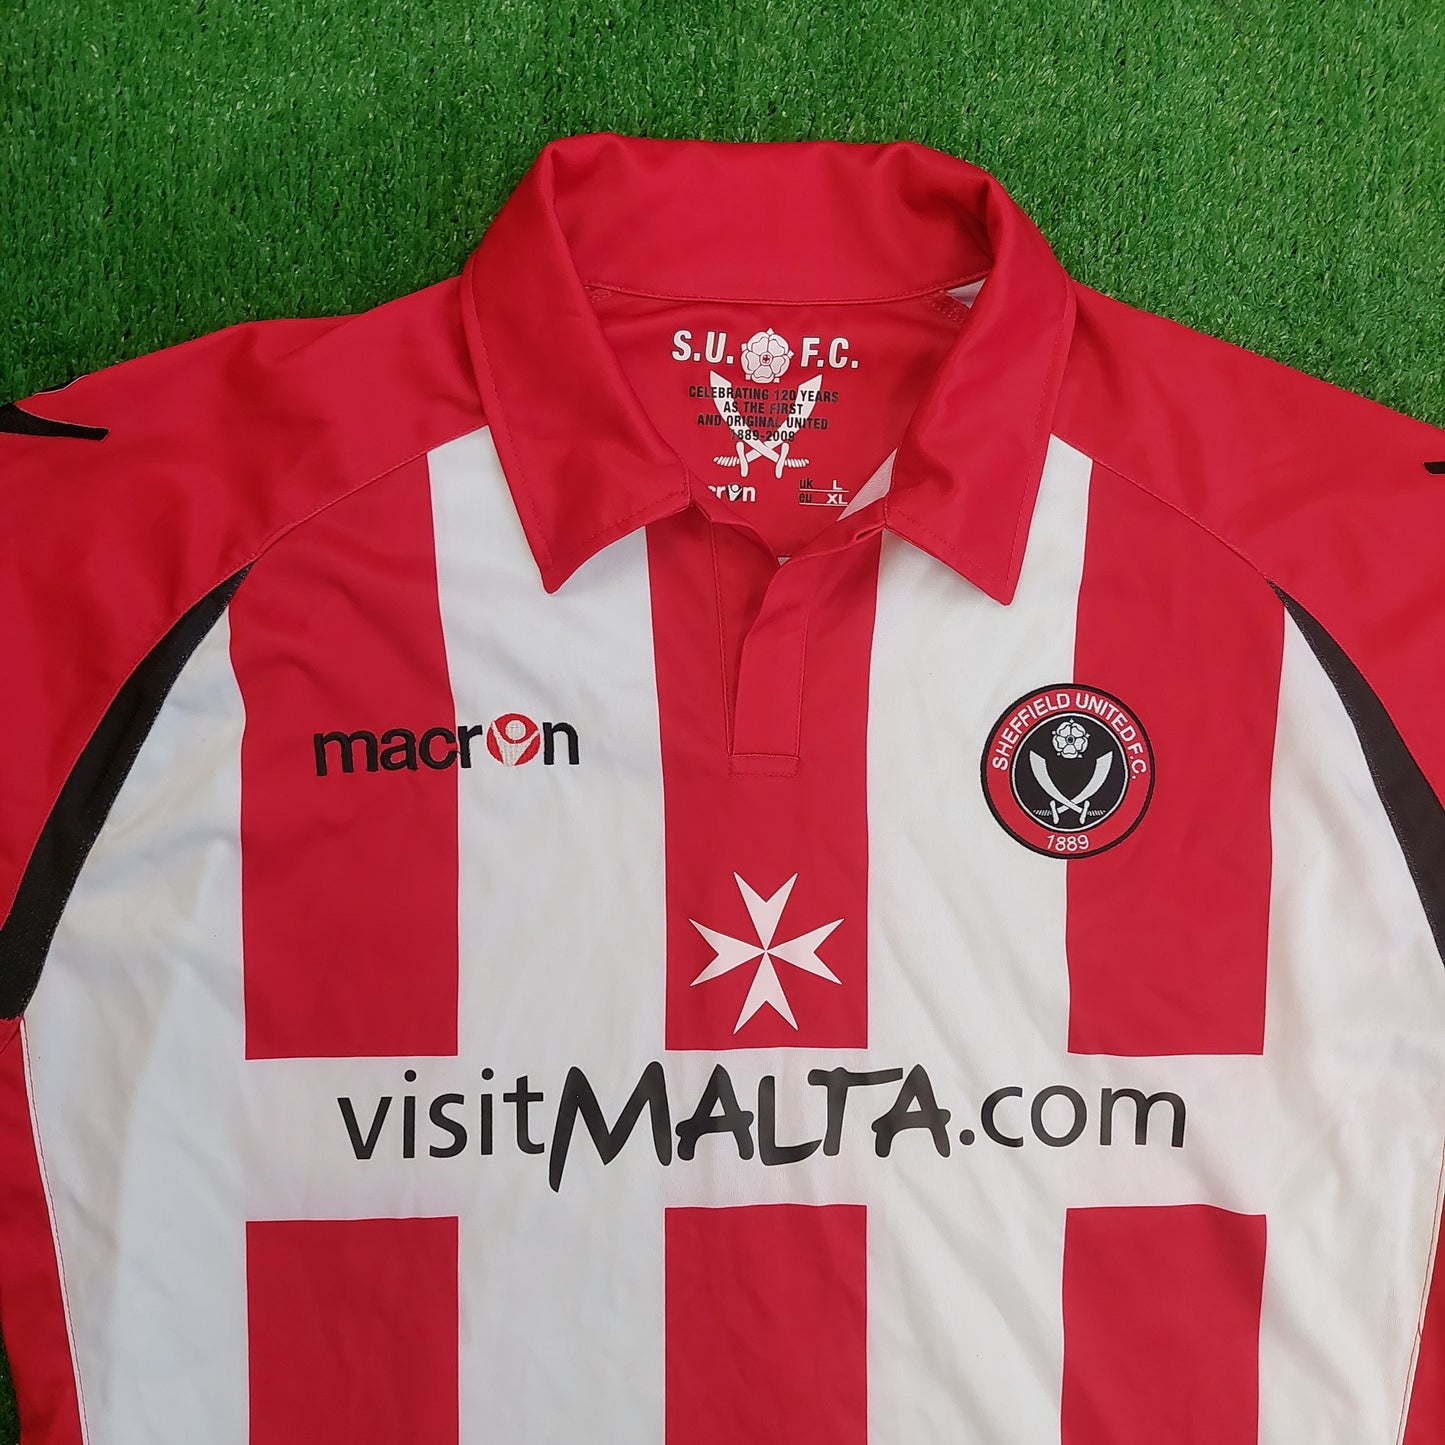 Sheffield United 2009/10 Home Shirt (Very Good) - Size L